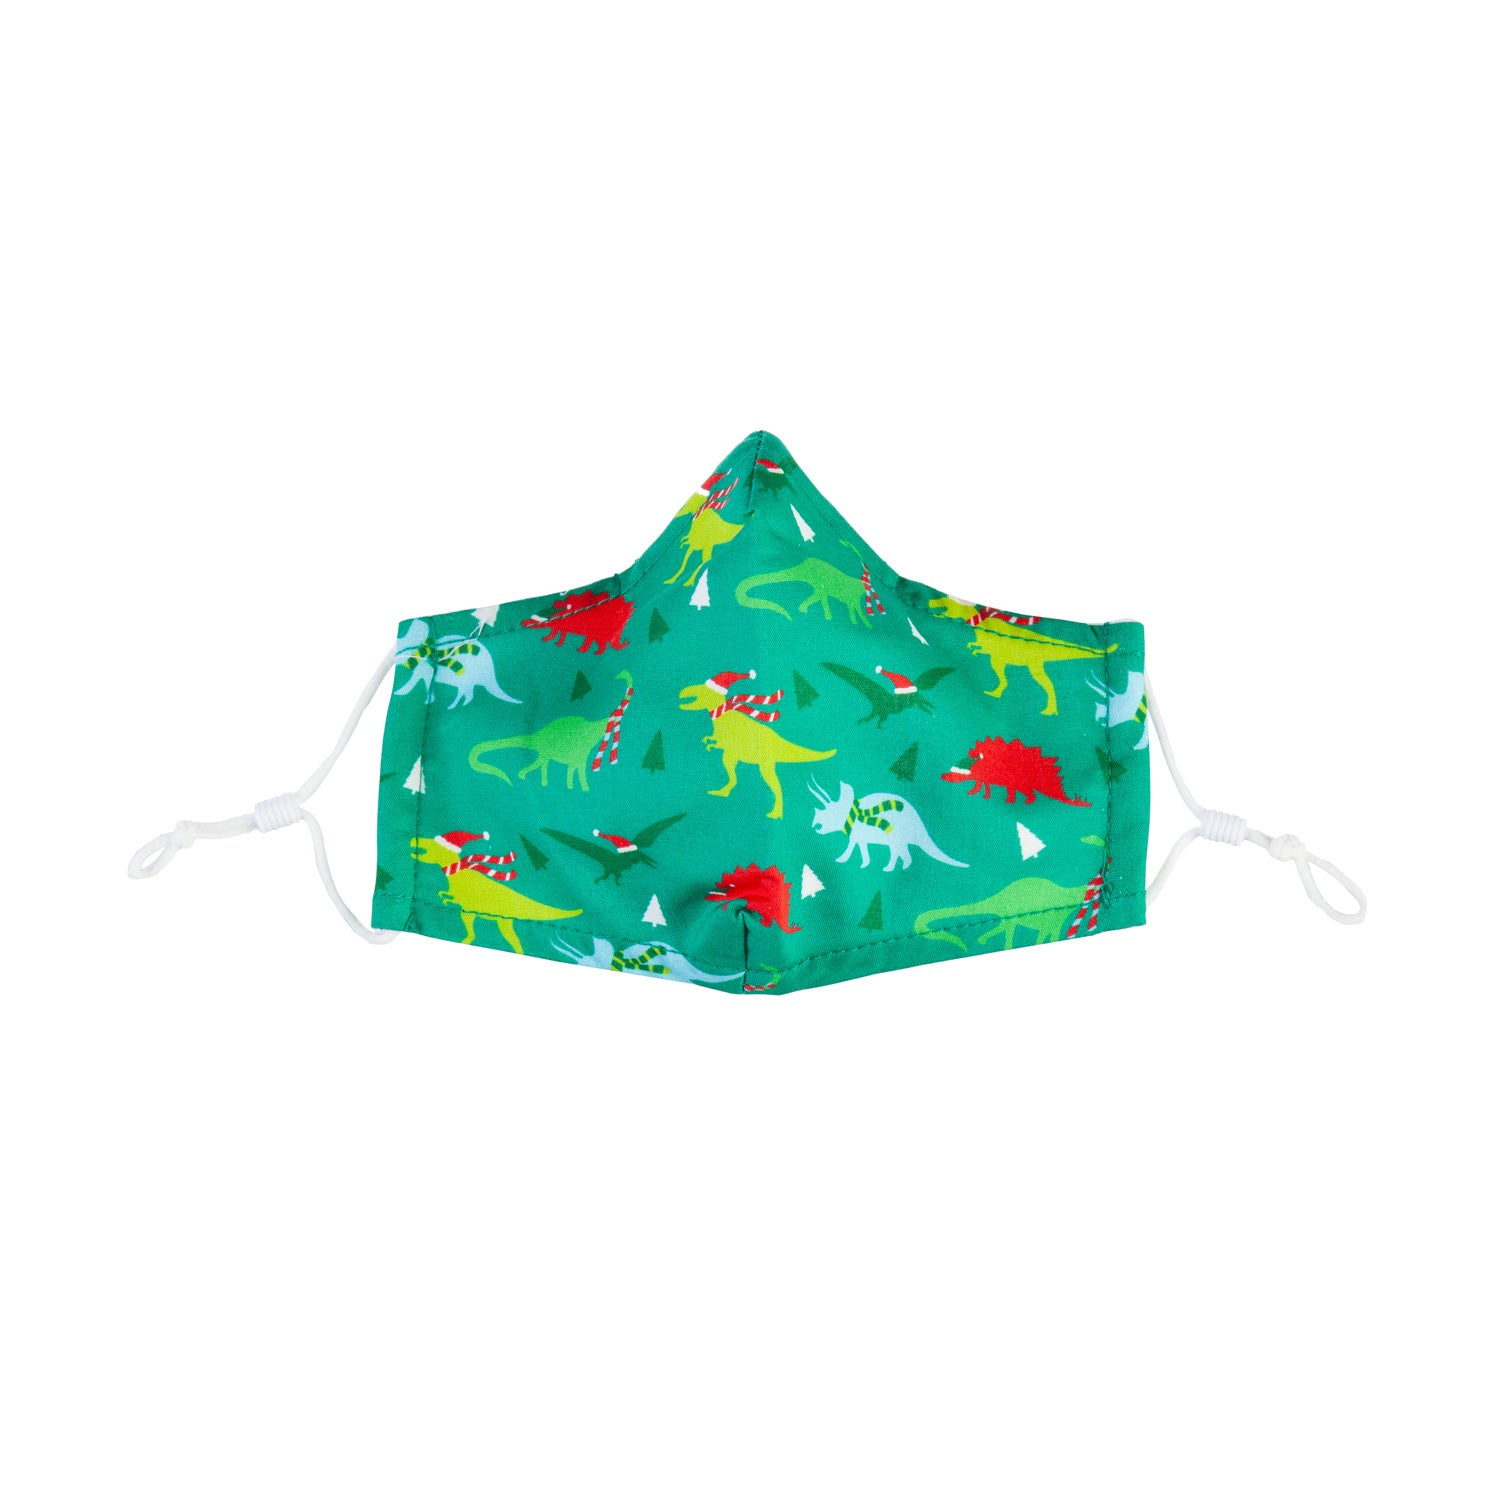 Children's Non-Medical Cotton Face Mask in Holiday Fun Print Set of 4